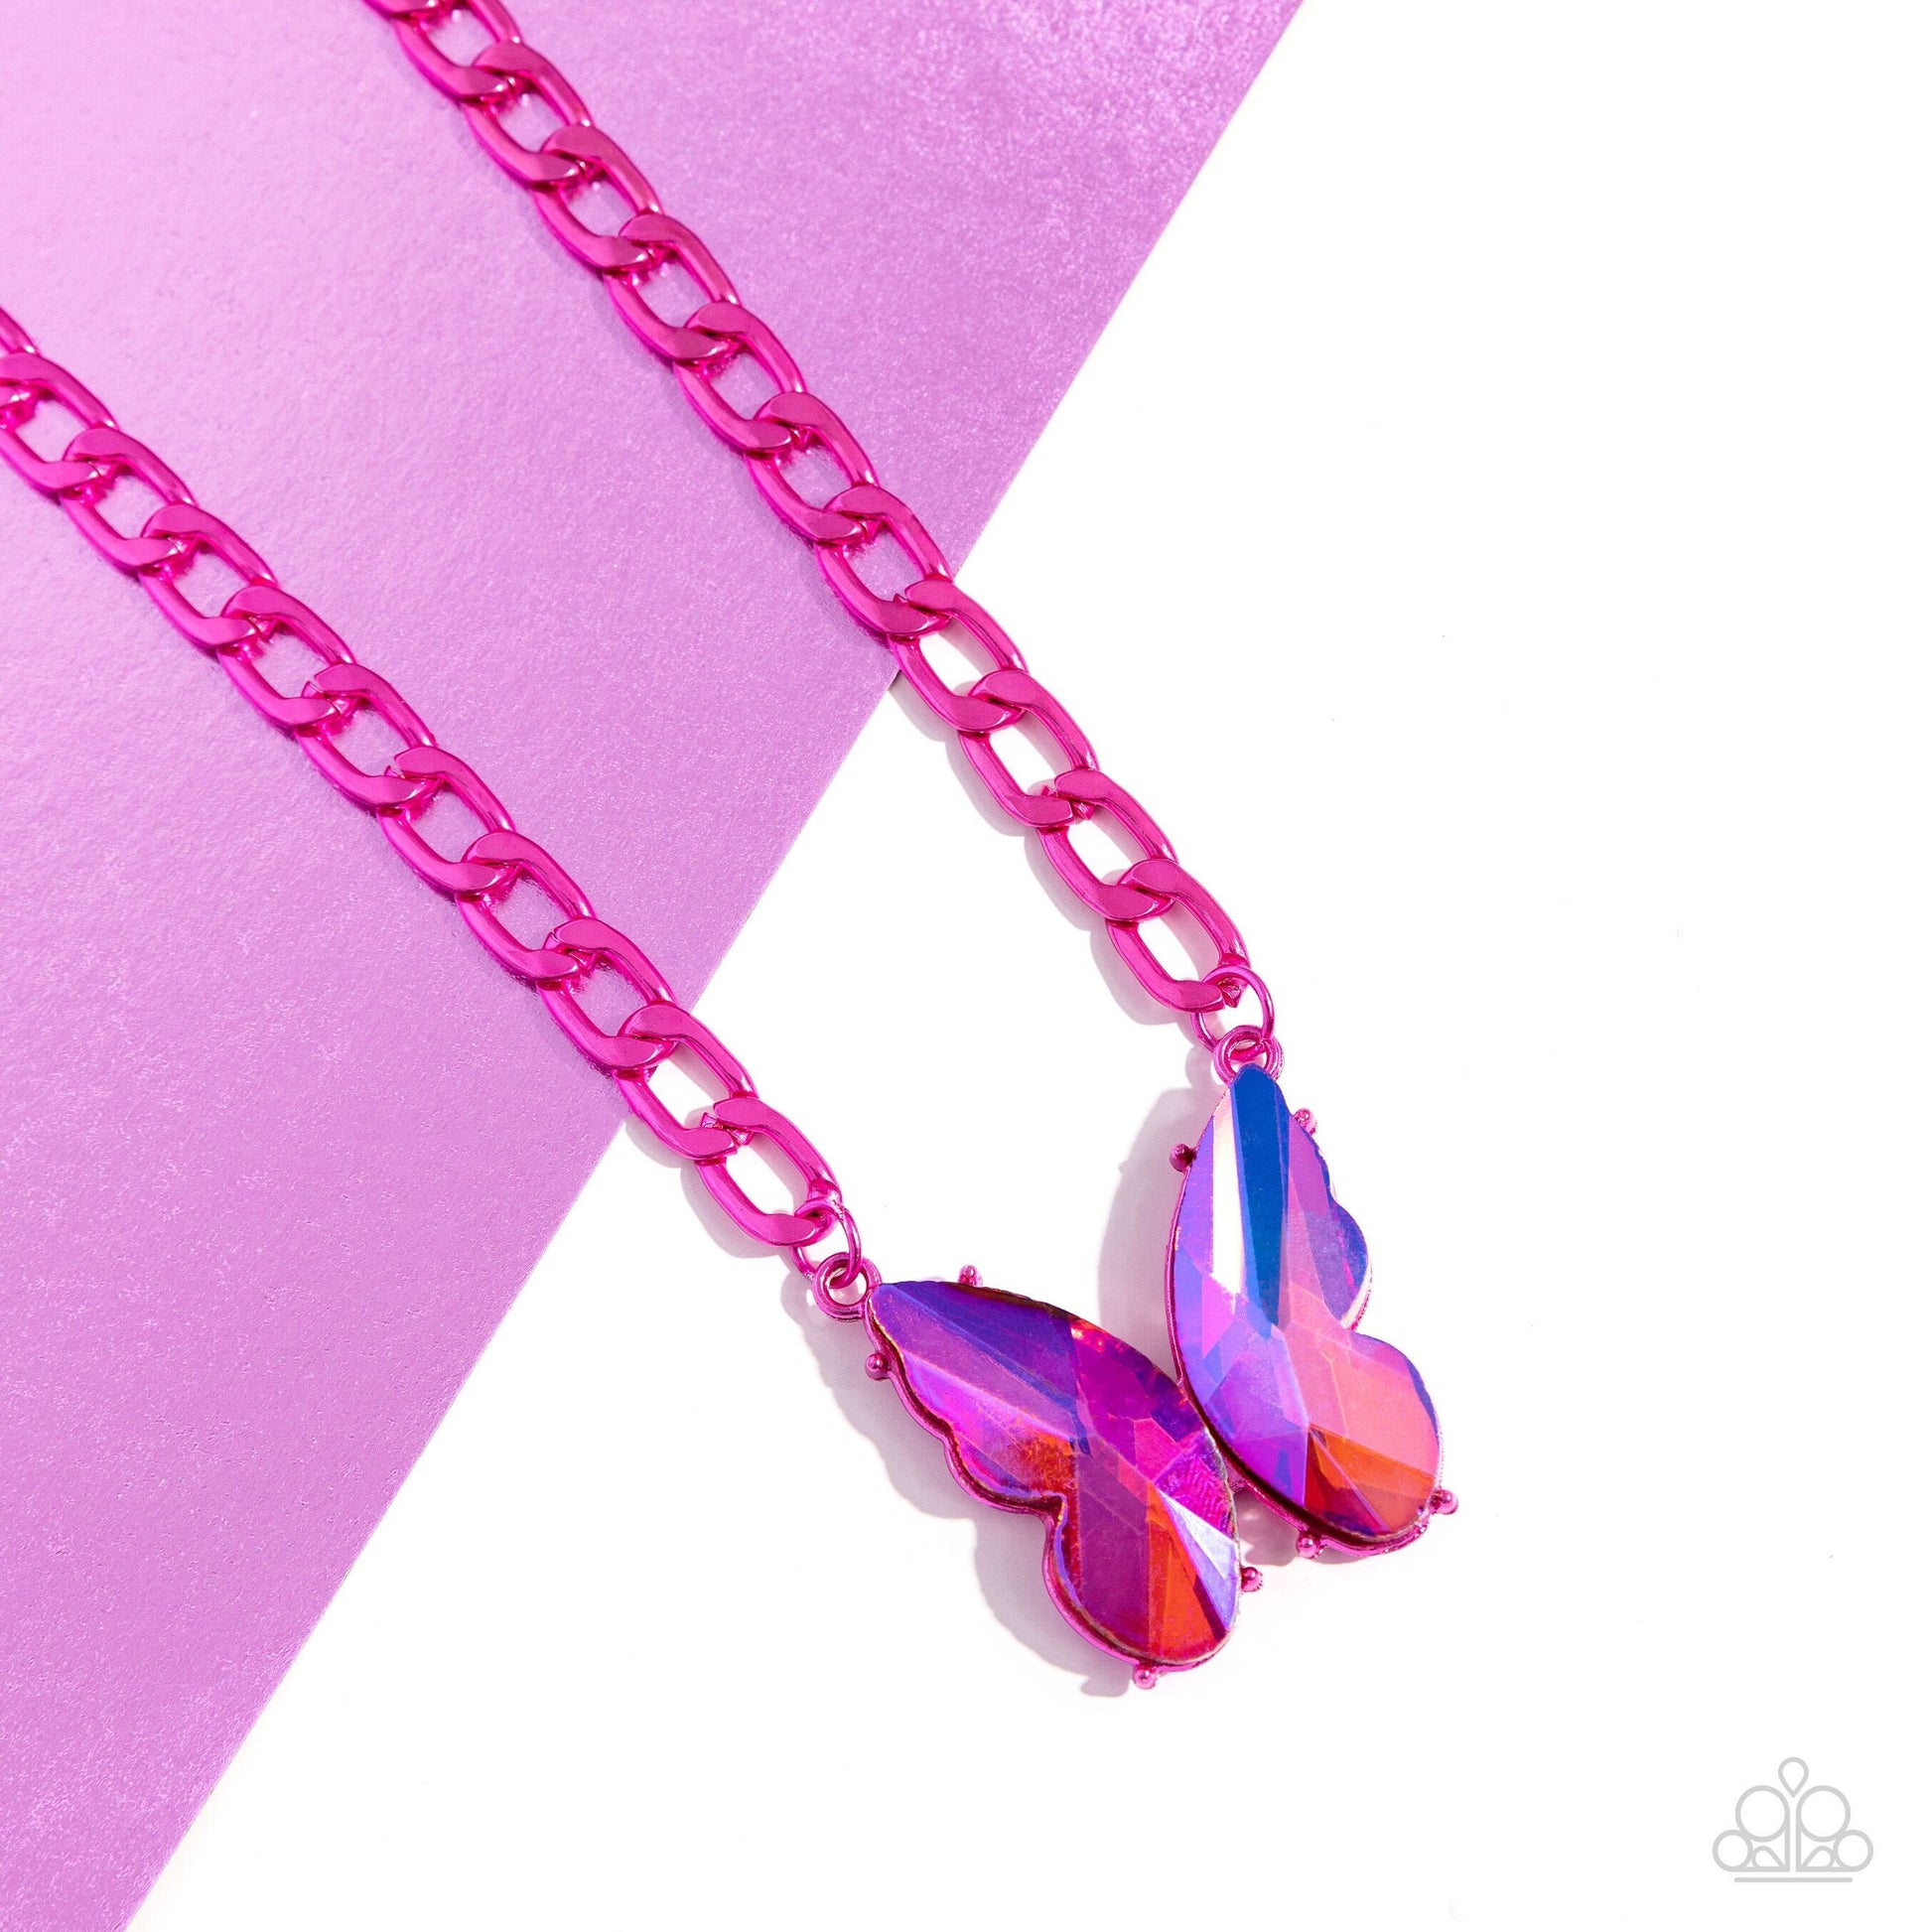 Fascinating Flyer Pink Butterfly Necklace - Paparazzi Accessories  Featuring a UV finish, a pair of oversized pink gem wings form into a pronged butterfly frame at the bottom of an electric pink curb chain for a vibrant, whimsical display. Features an adjustable clasp closure.  Sold as one individual necklace. Includes one pair of matching earrings.  P2ST-PKXX-161XX